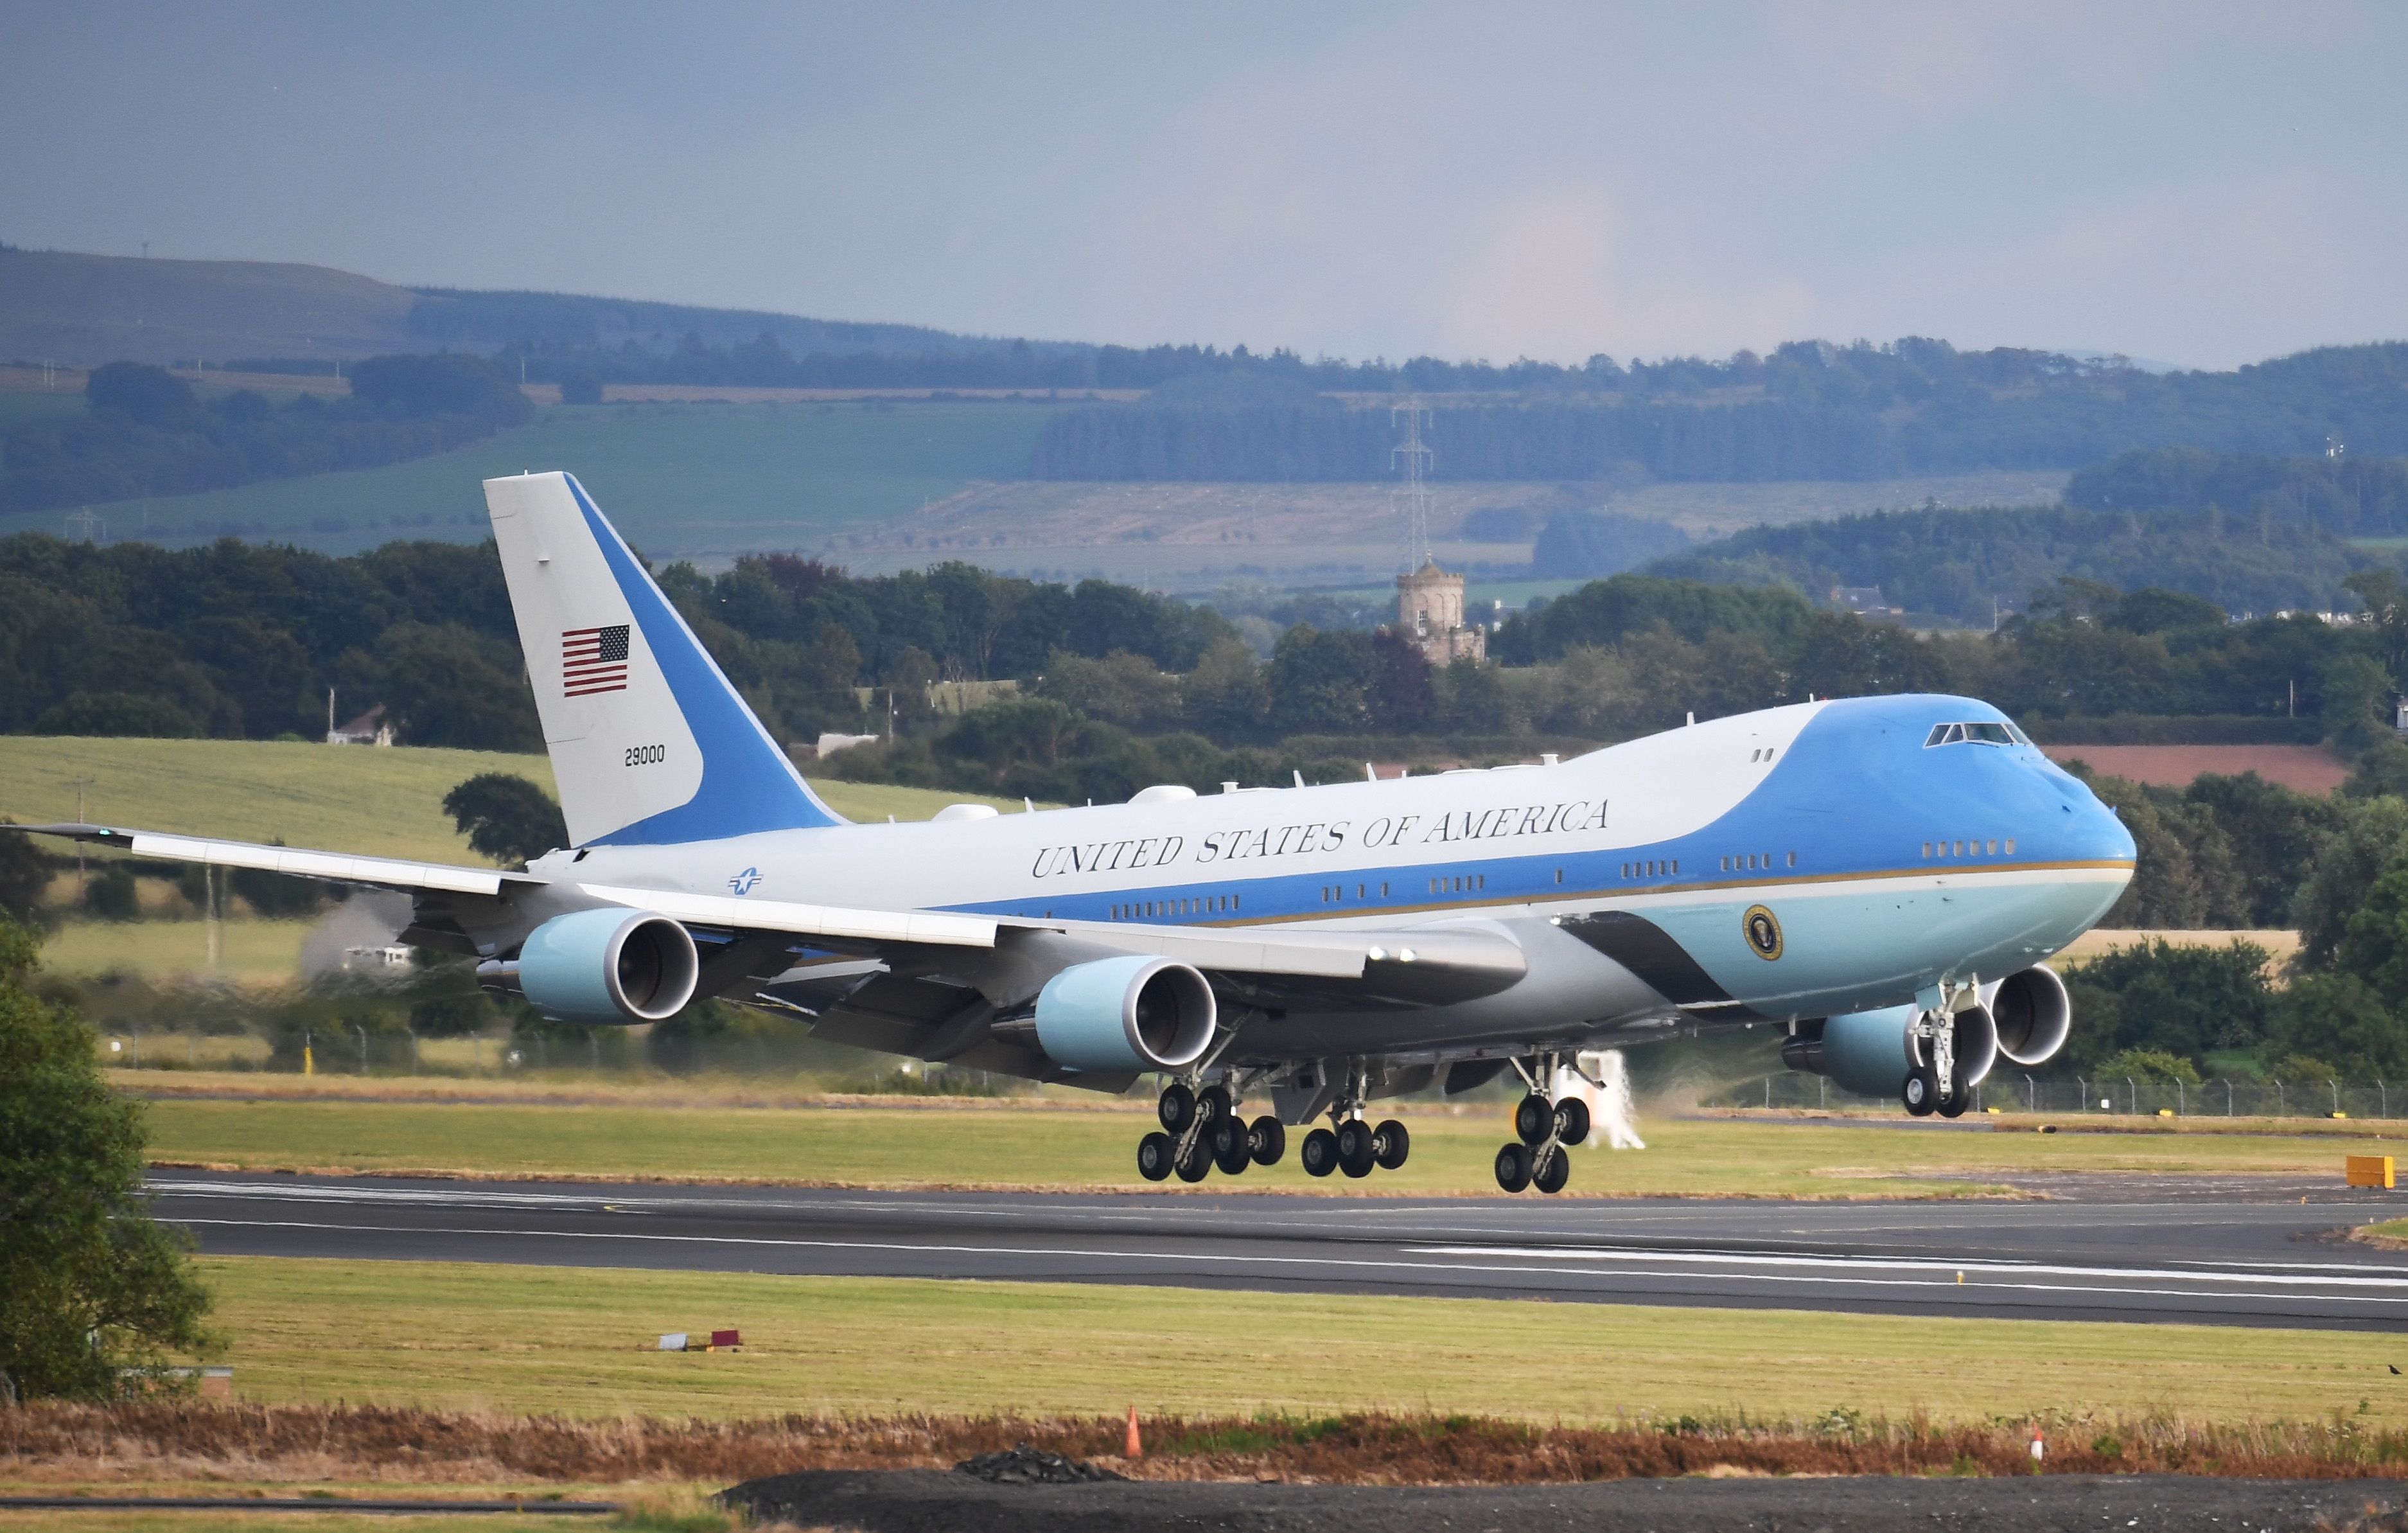 Trump Air Force One deal leaves Boeing with $1B hangover - The Air